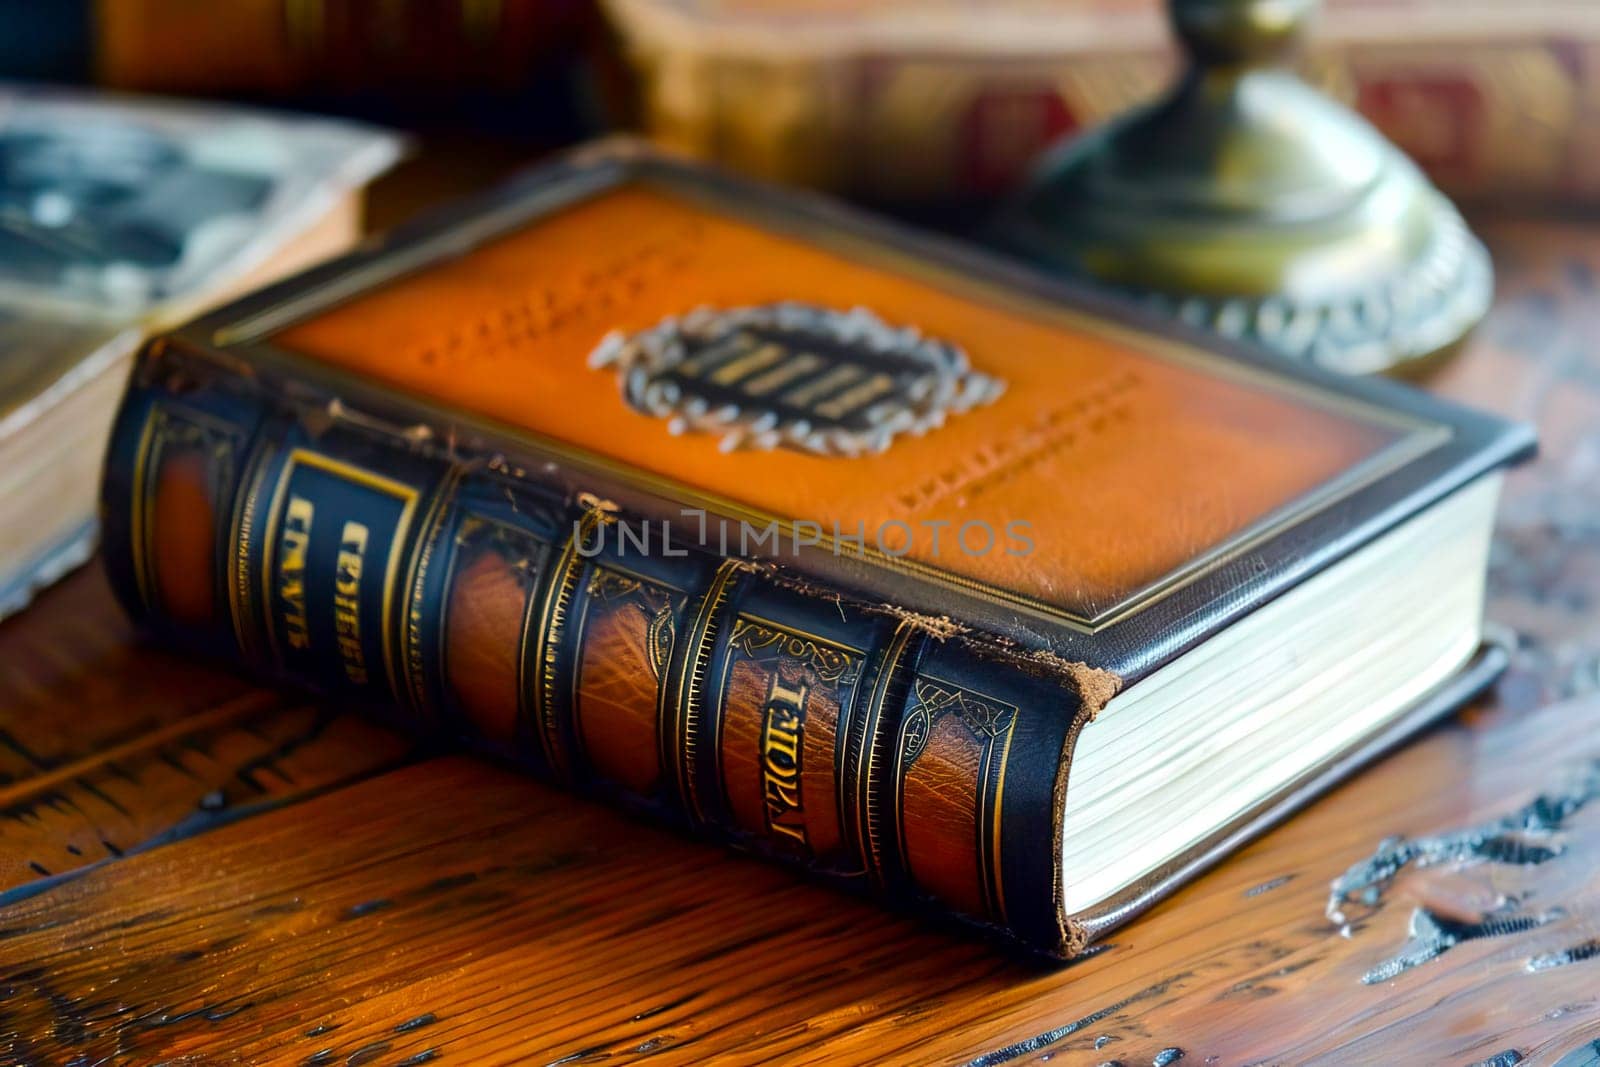 A Shining Holy Bible placed on top of a wooden table.